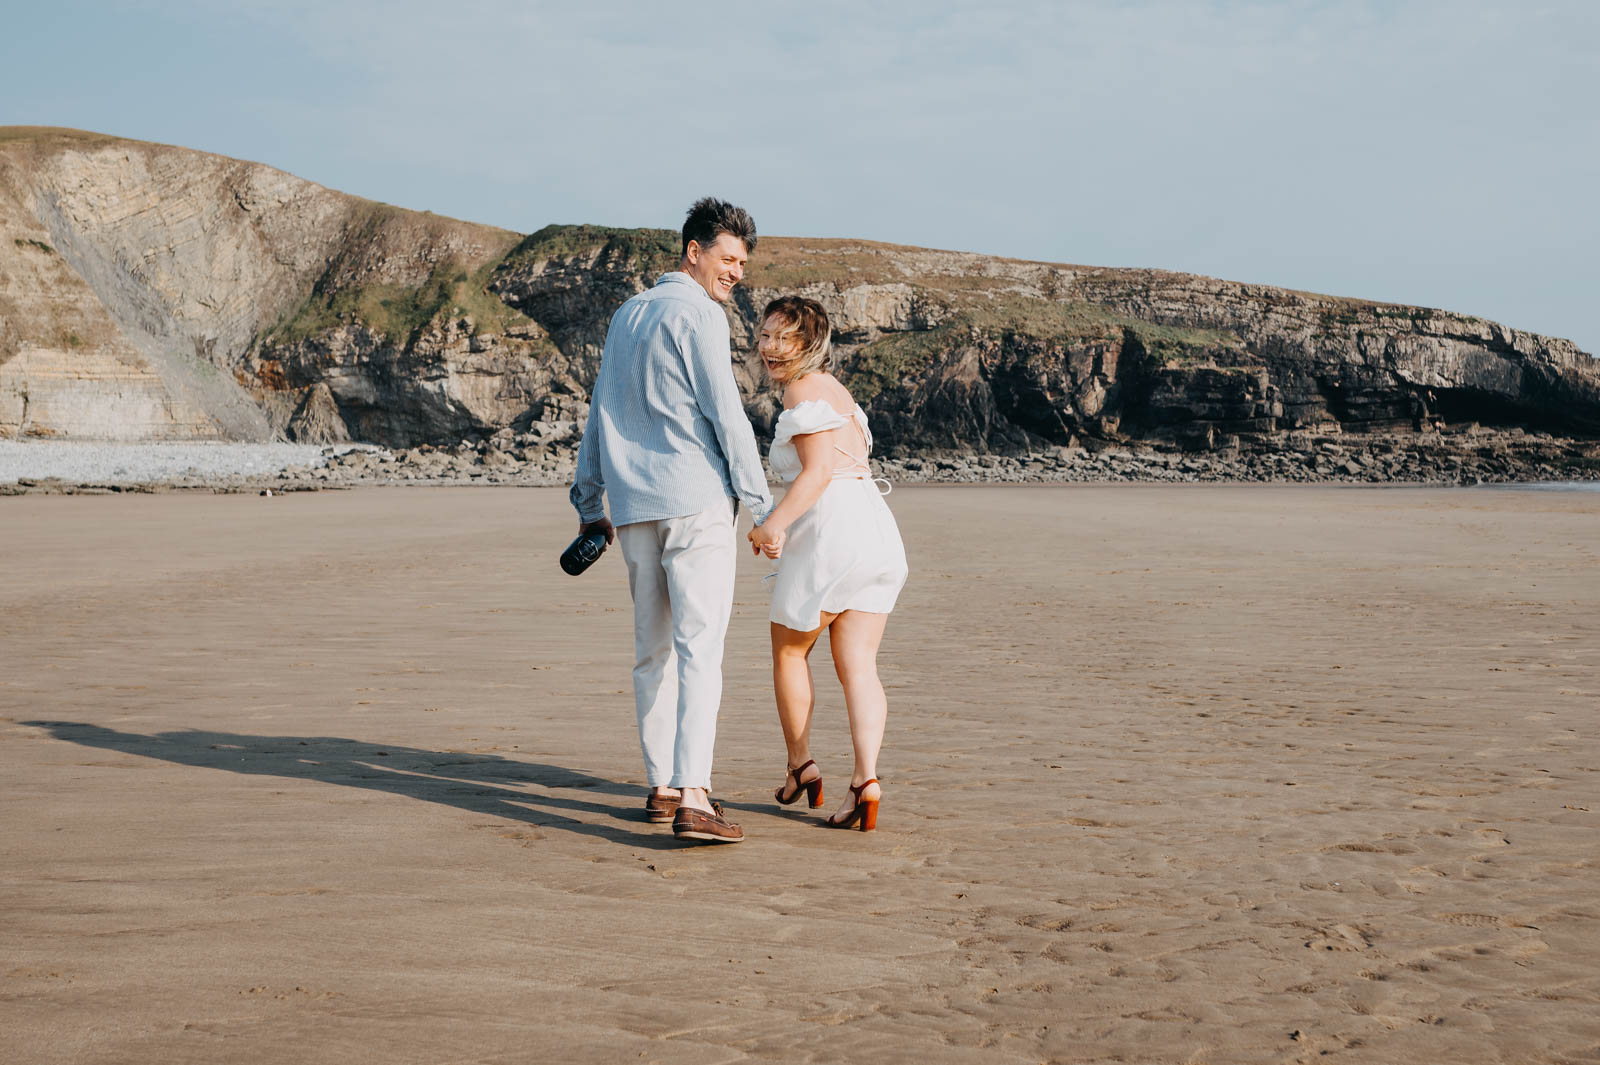 Engagement photoshoot Wales on the beach - smiling couple